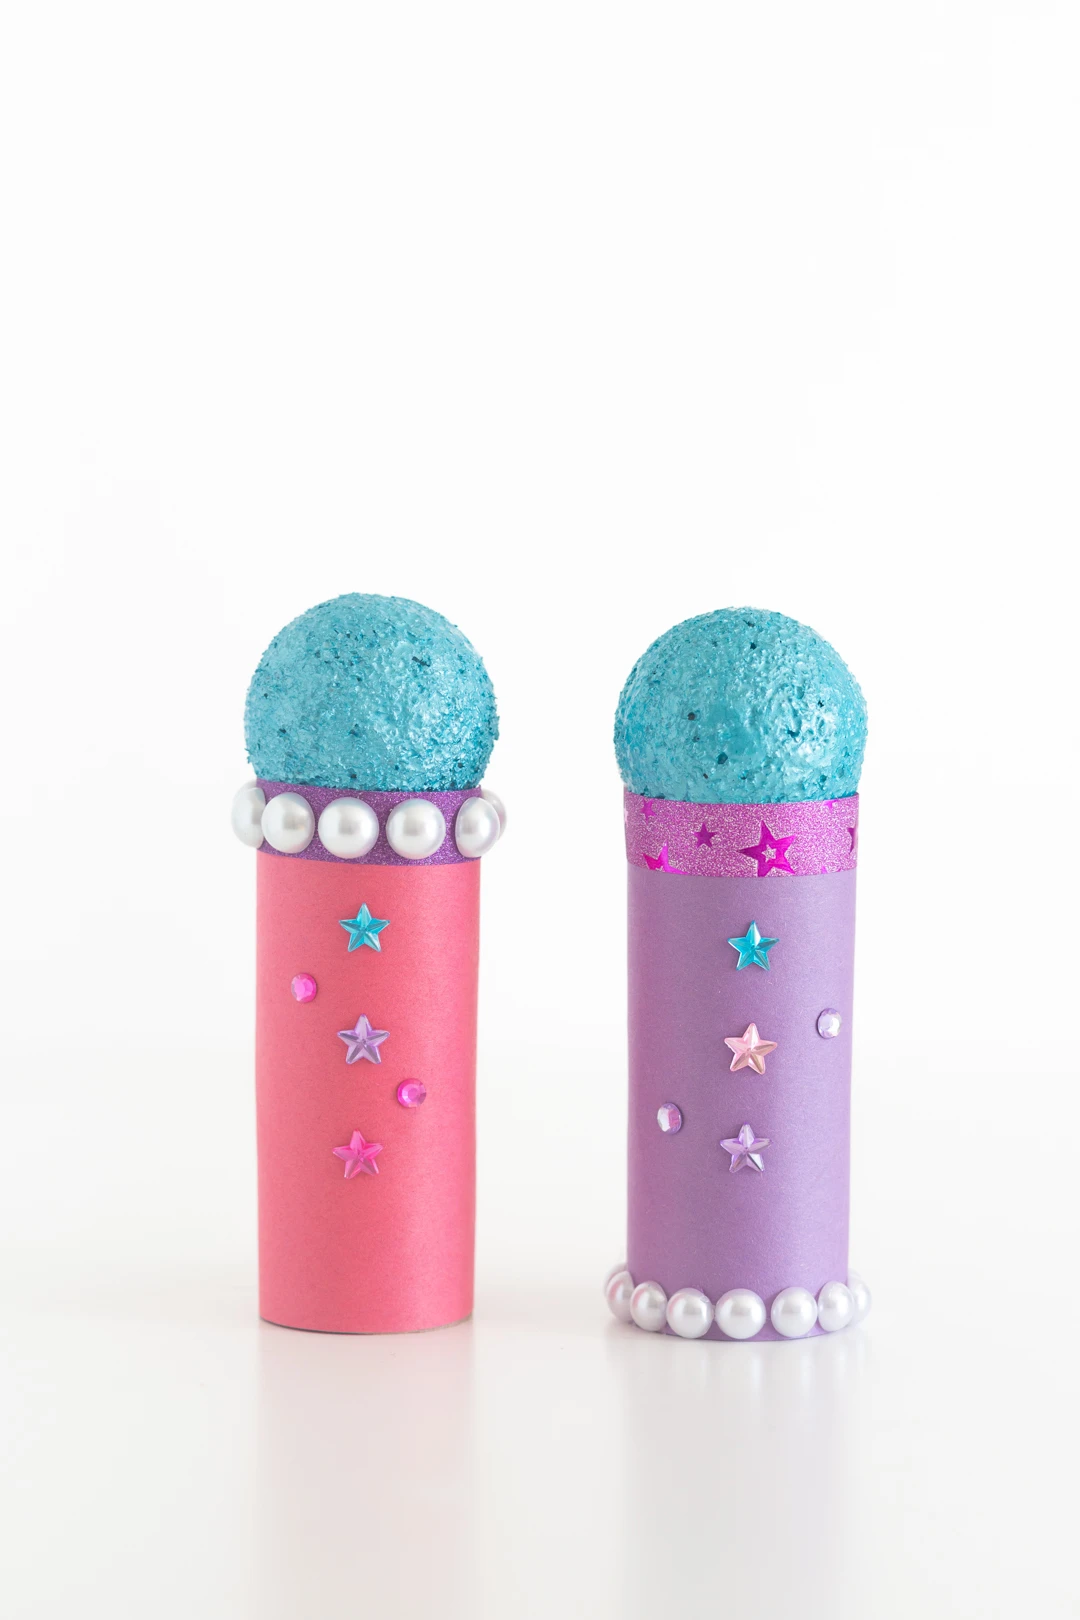 two craft microphones made of toilet paper rolls, construction paper and small styrofoam balls